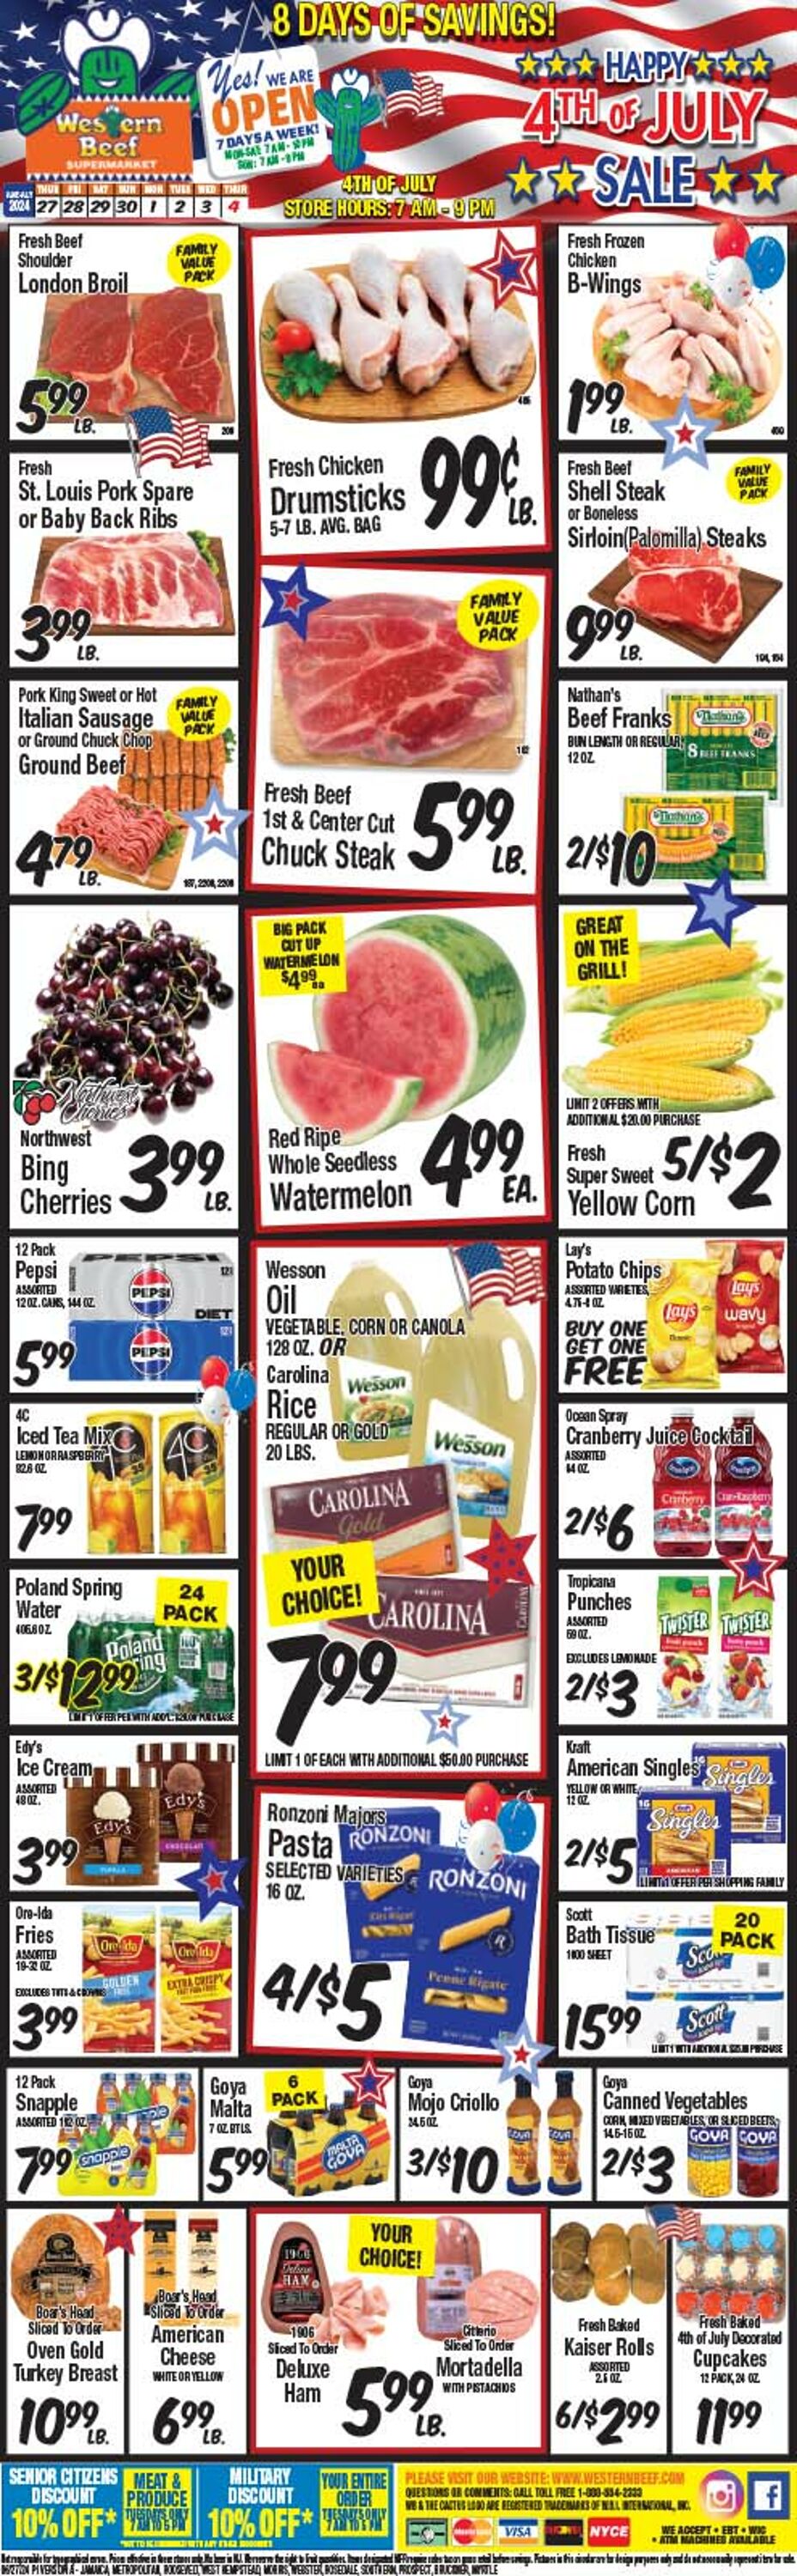 Western Beef Promotional weekly ads